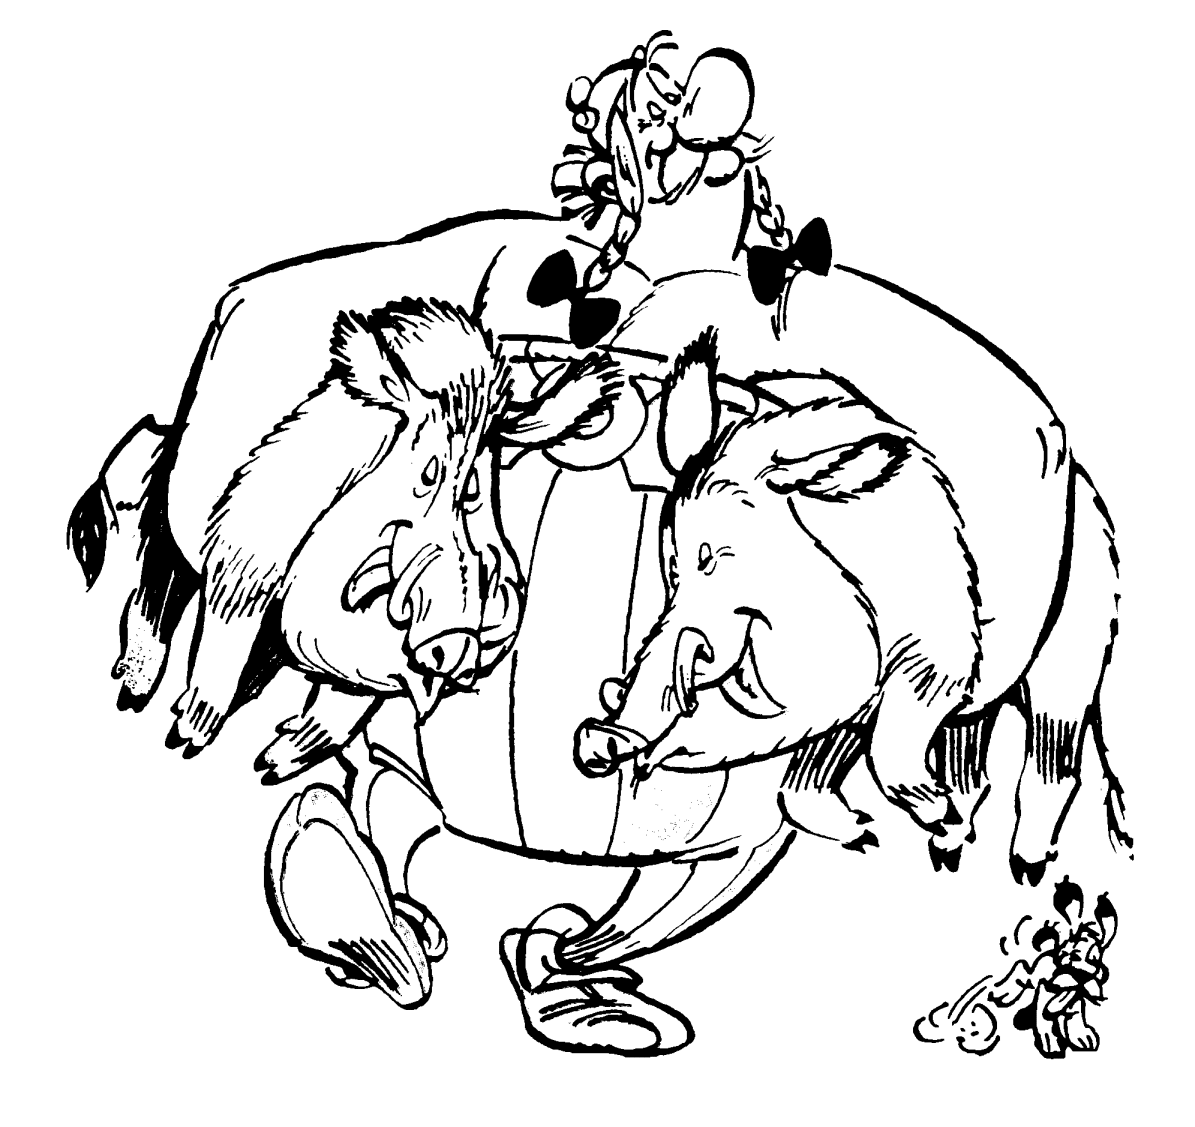 Asterix and obelix Coloring Pages